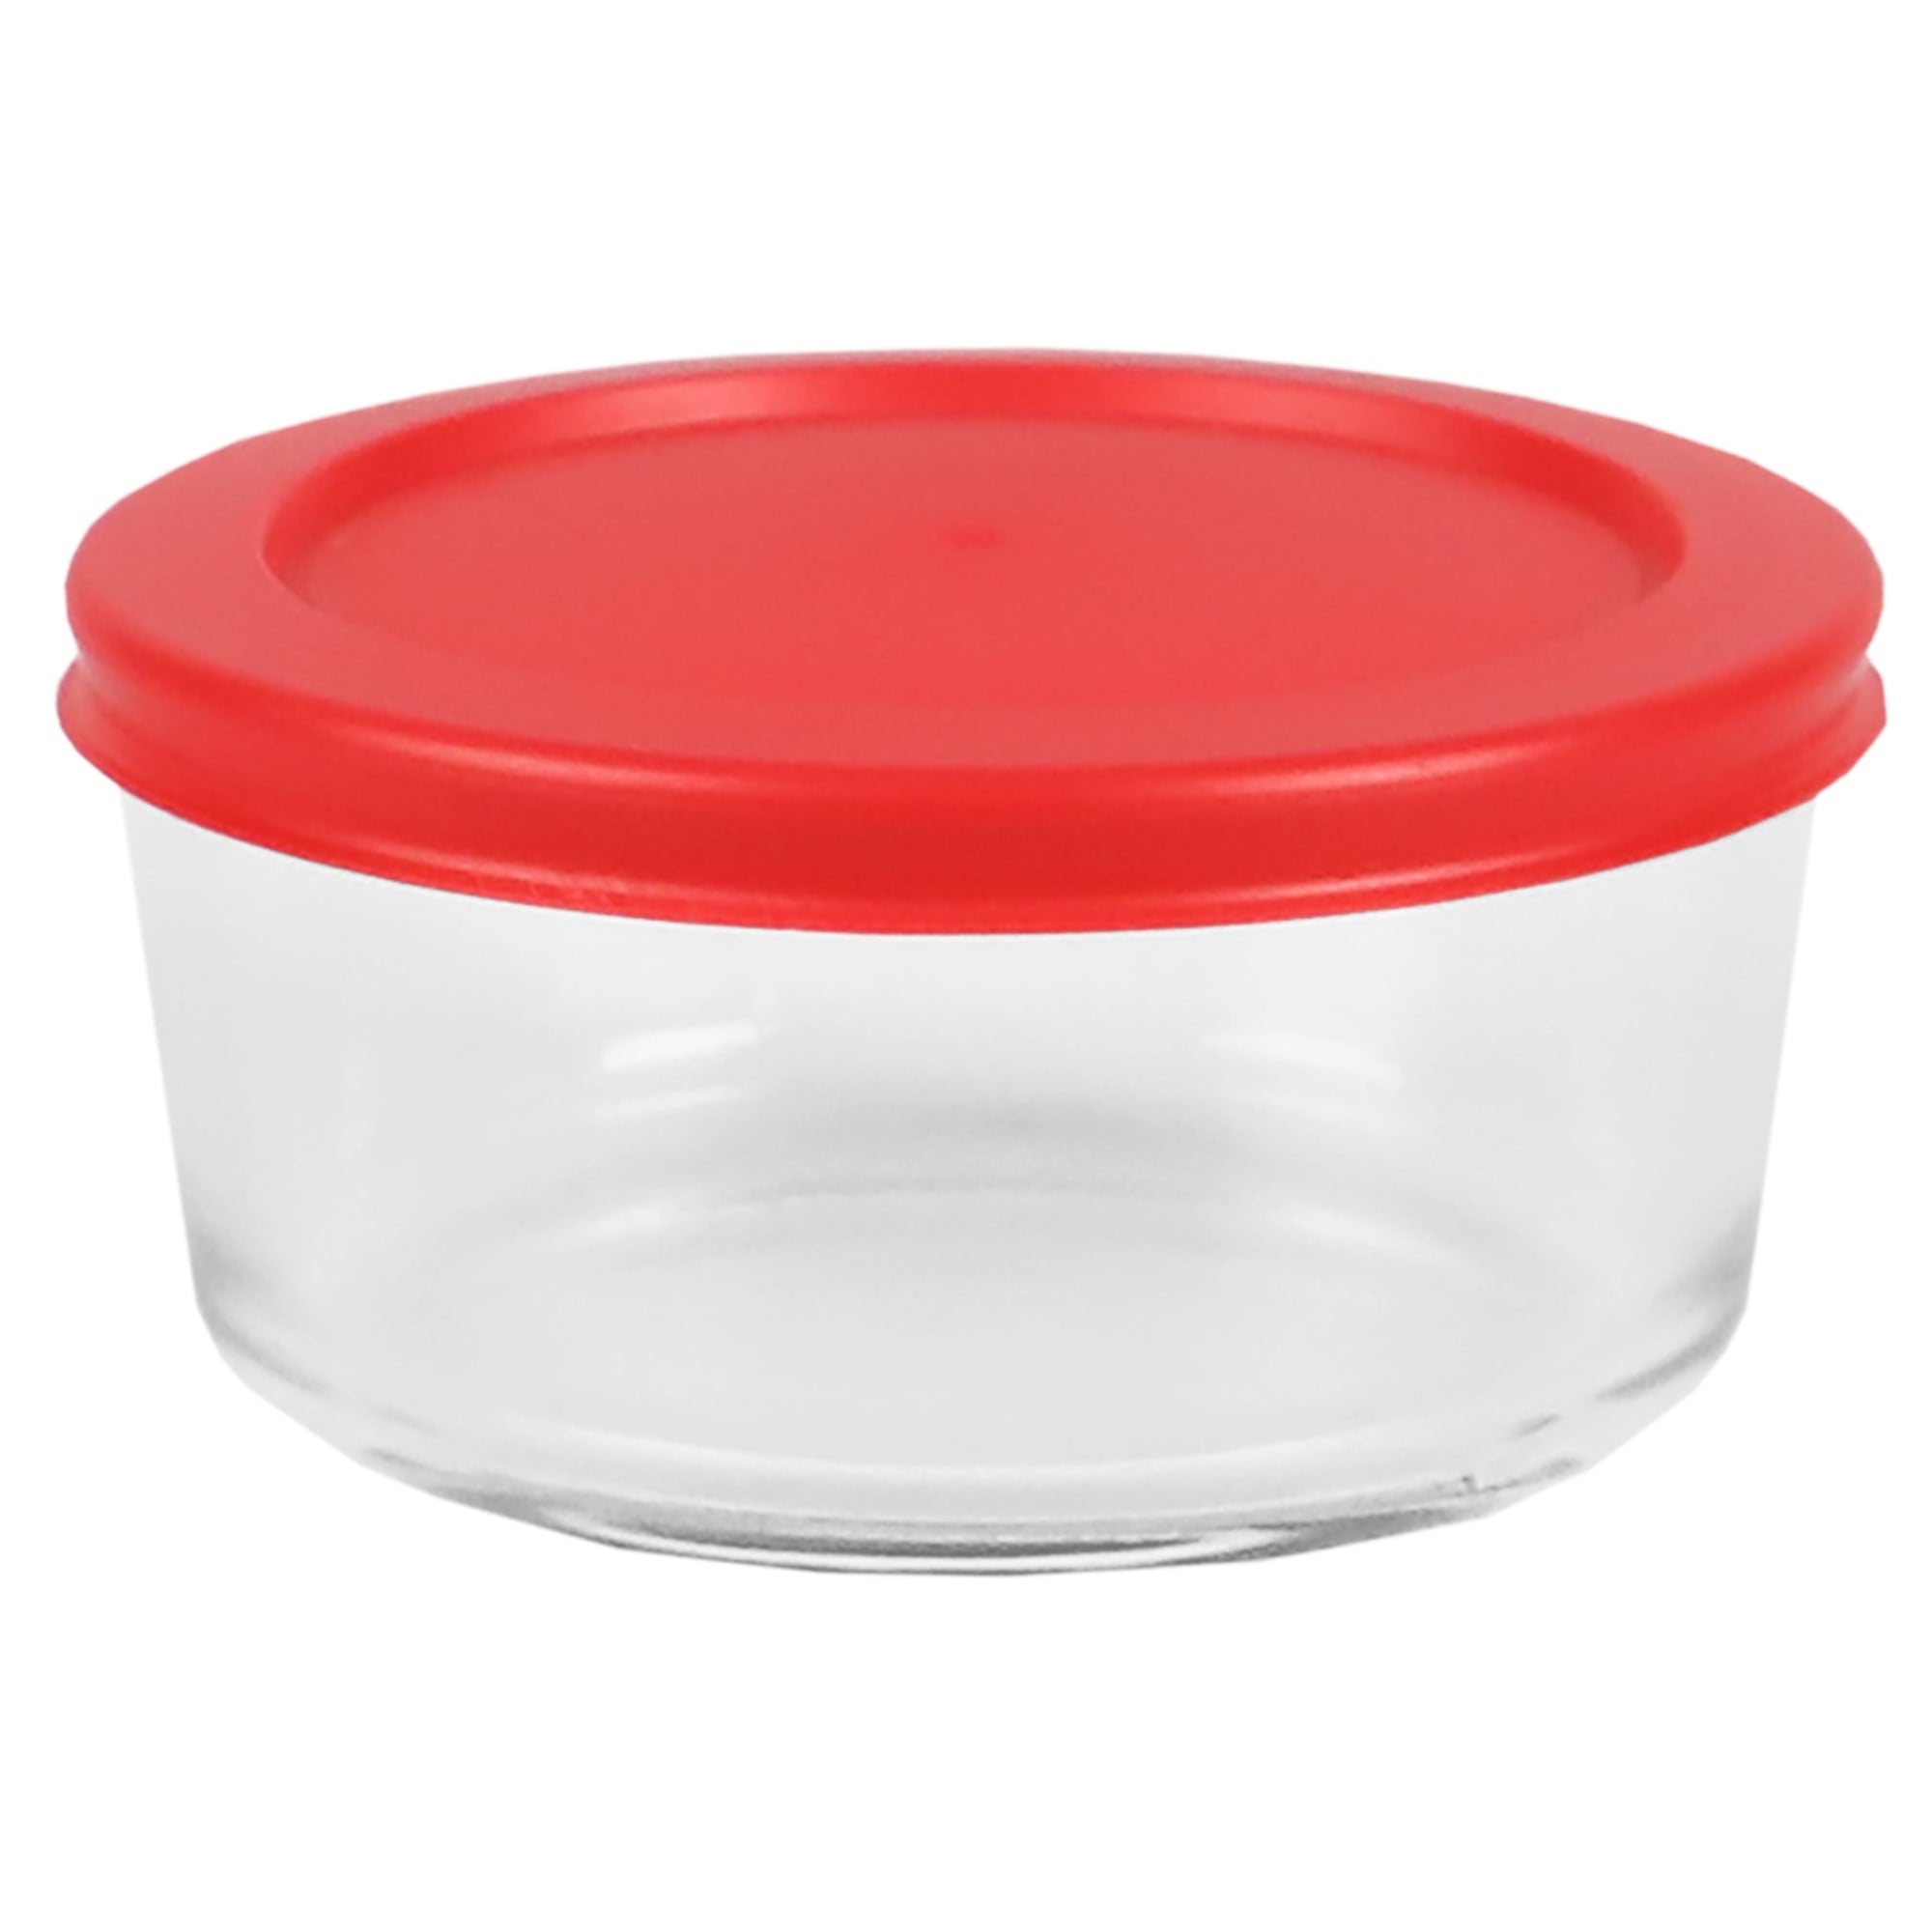 Home Basics 16 oz. Round Glass Food Storage Container with Red Lid, Clear, FOOD PREP